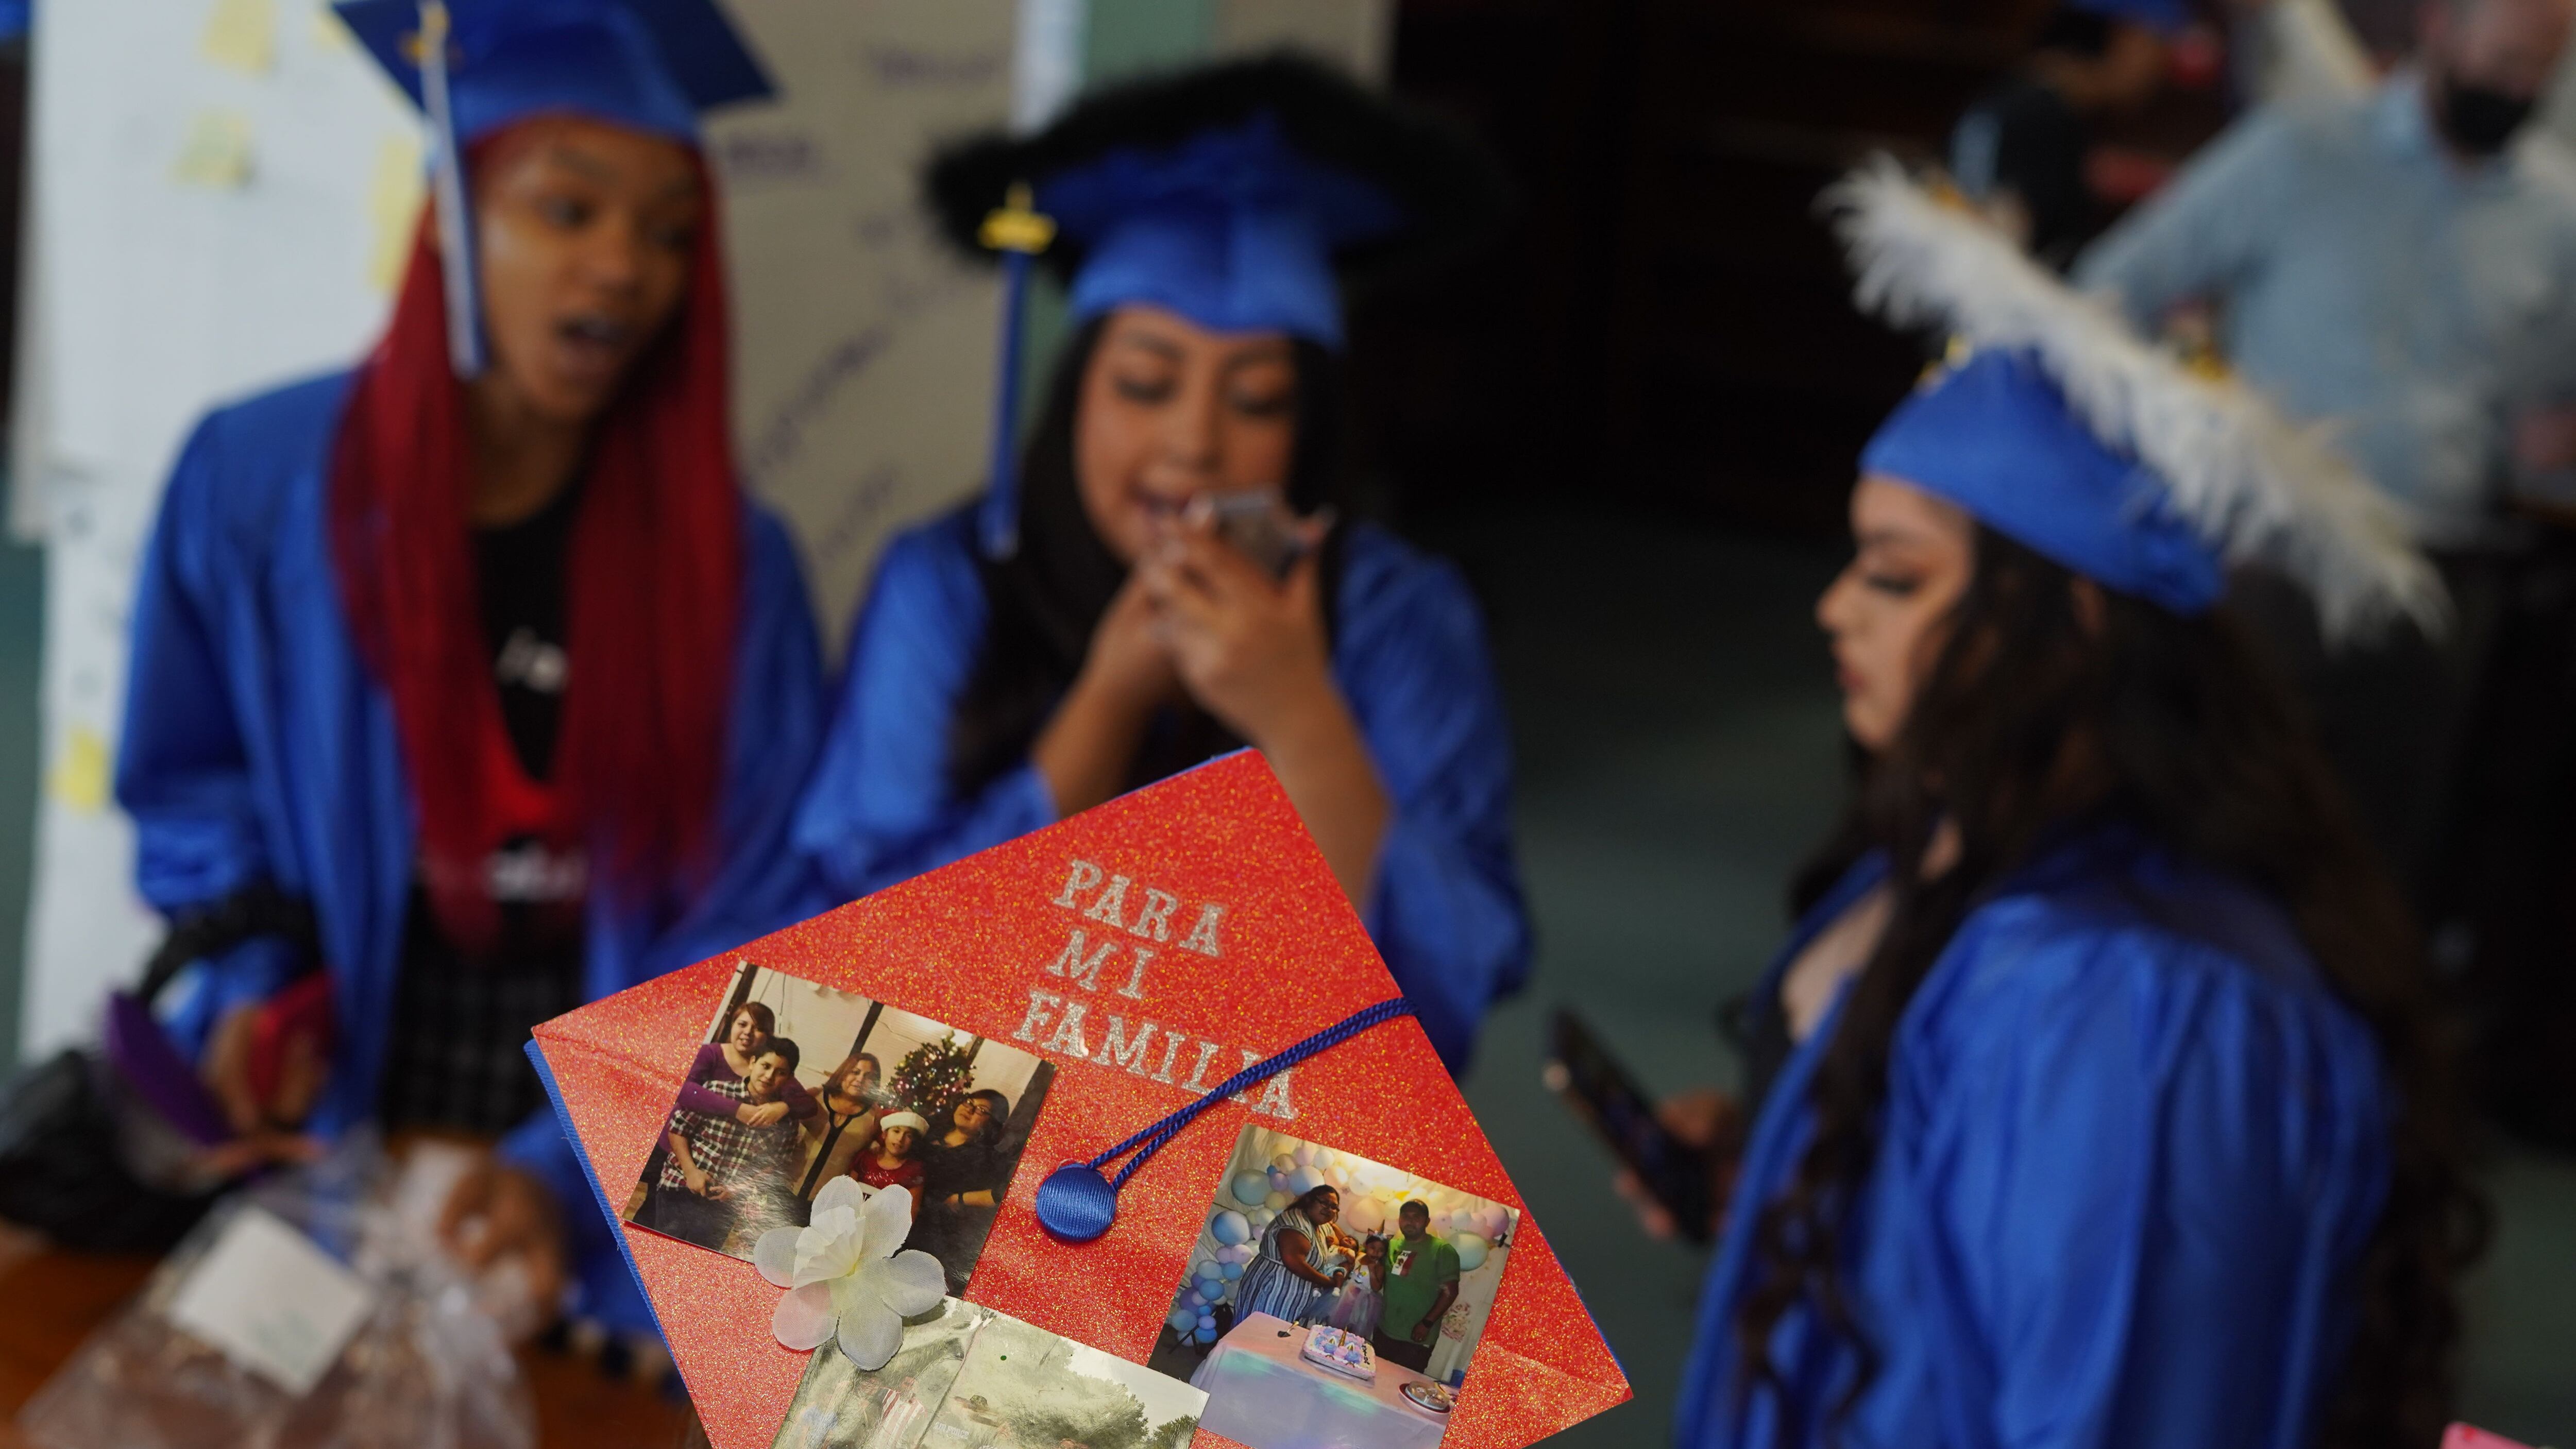 Three high school graduates in blue caps and gowns are in the background, while a close up of a graduation cap with photos taped to it is in the foreground.